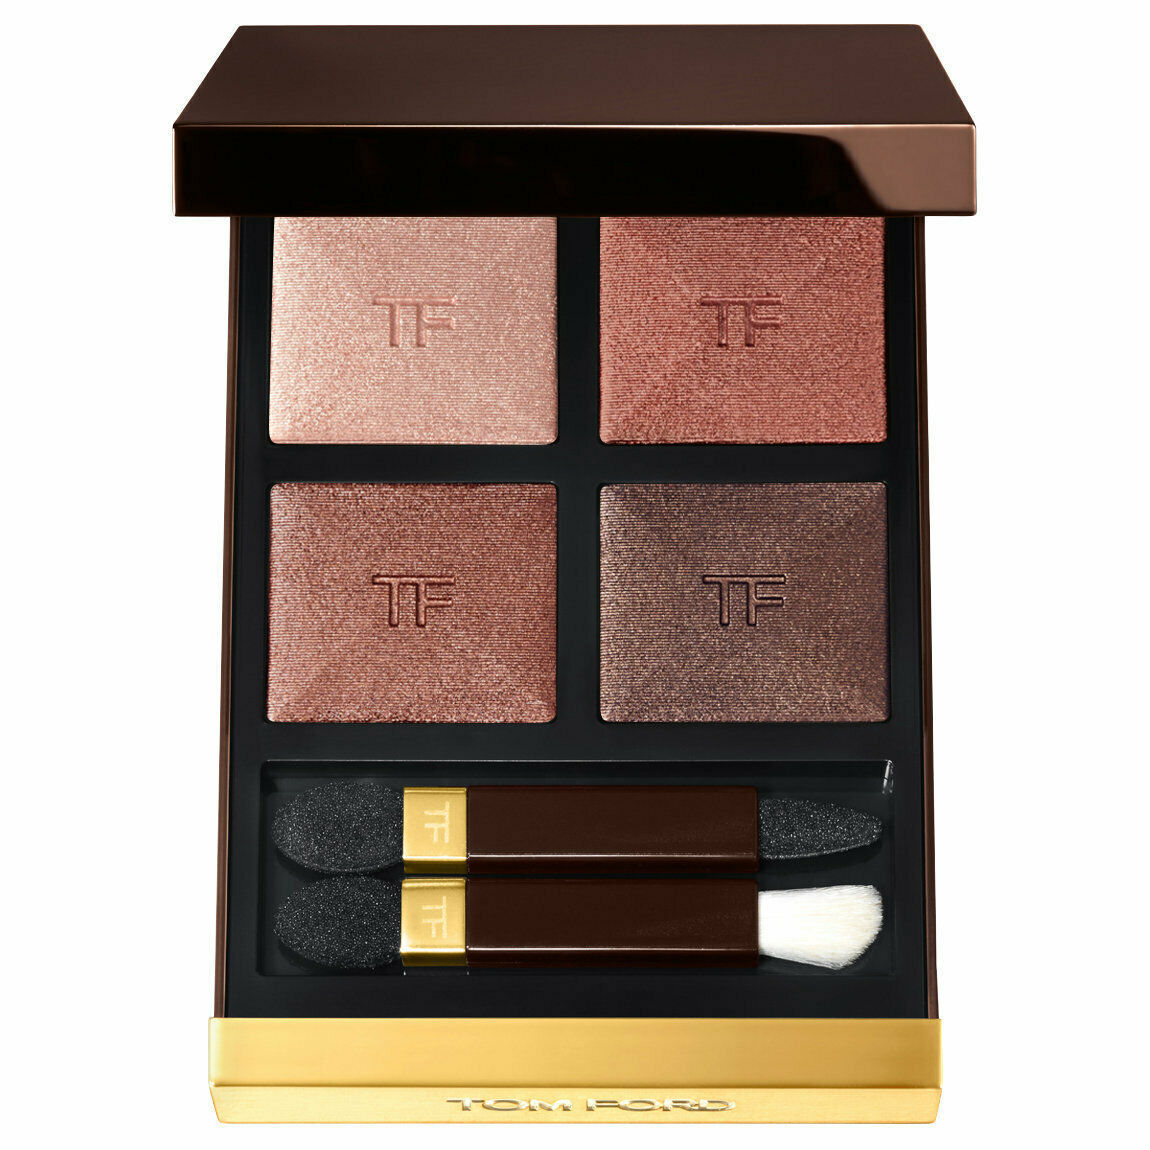 Primary image for TOM FORD Eye Color Eye Shadow Quad Palette BODY HEAT 03 Peach Taupe Brown BOXED